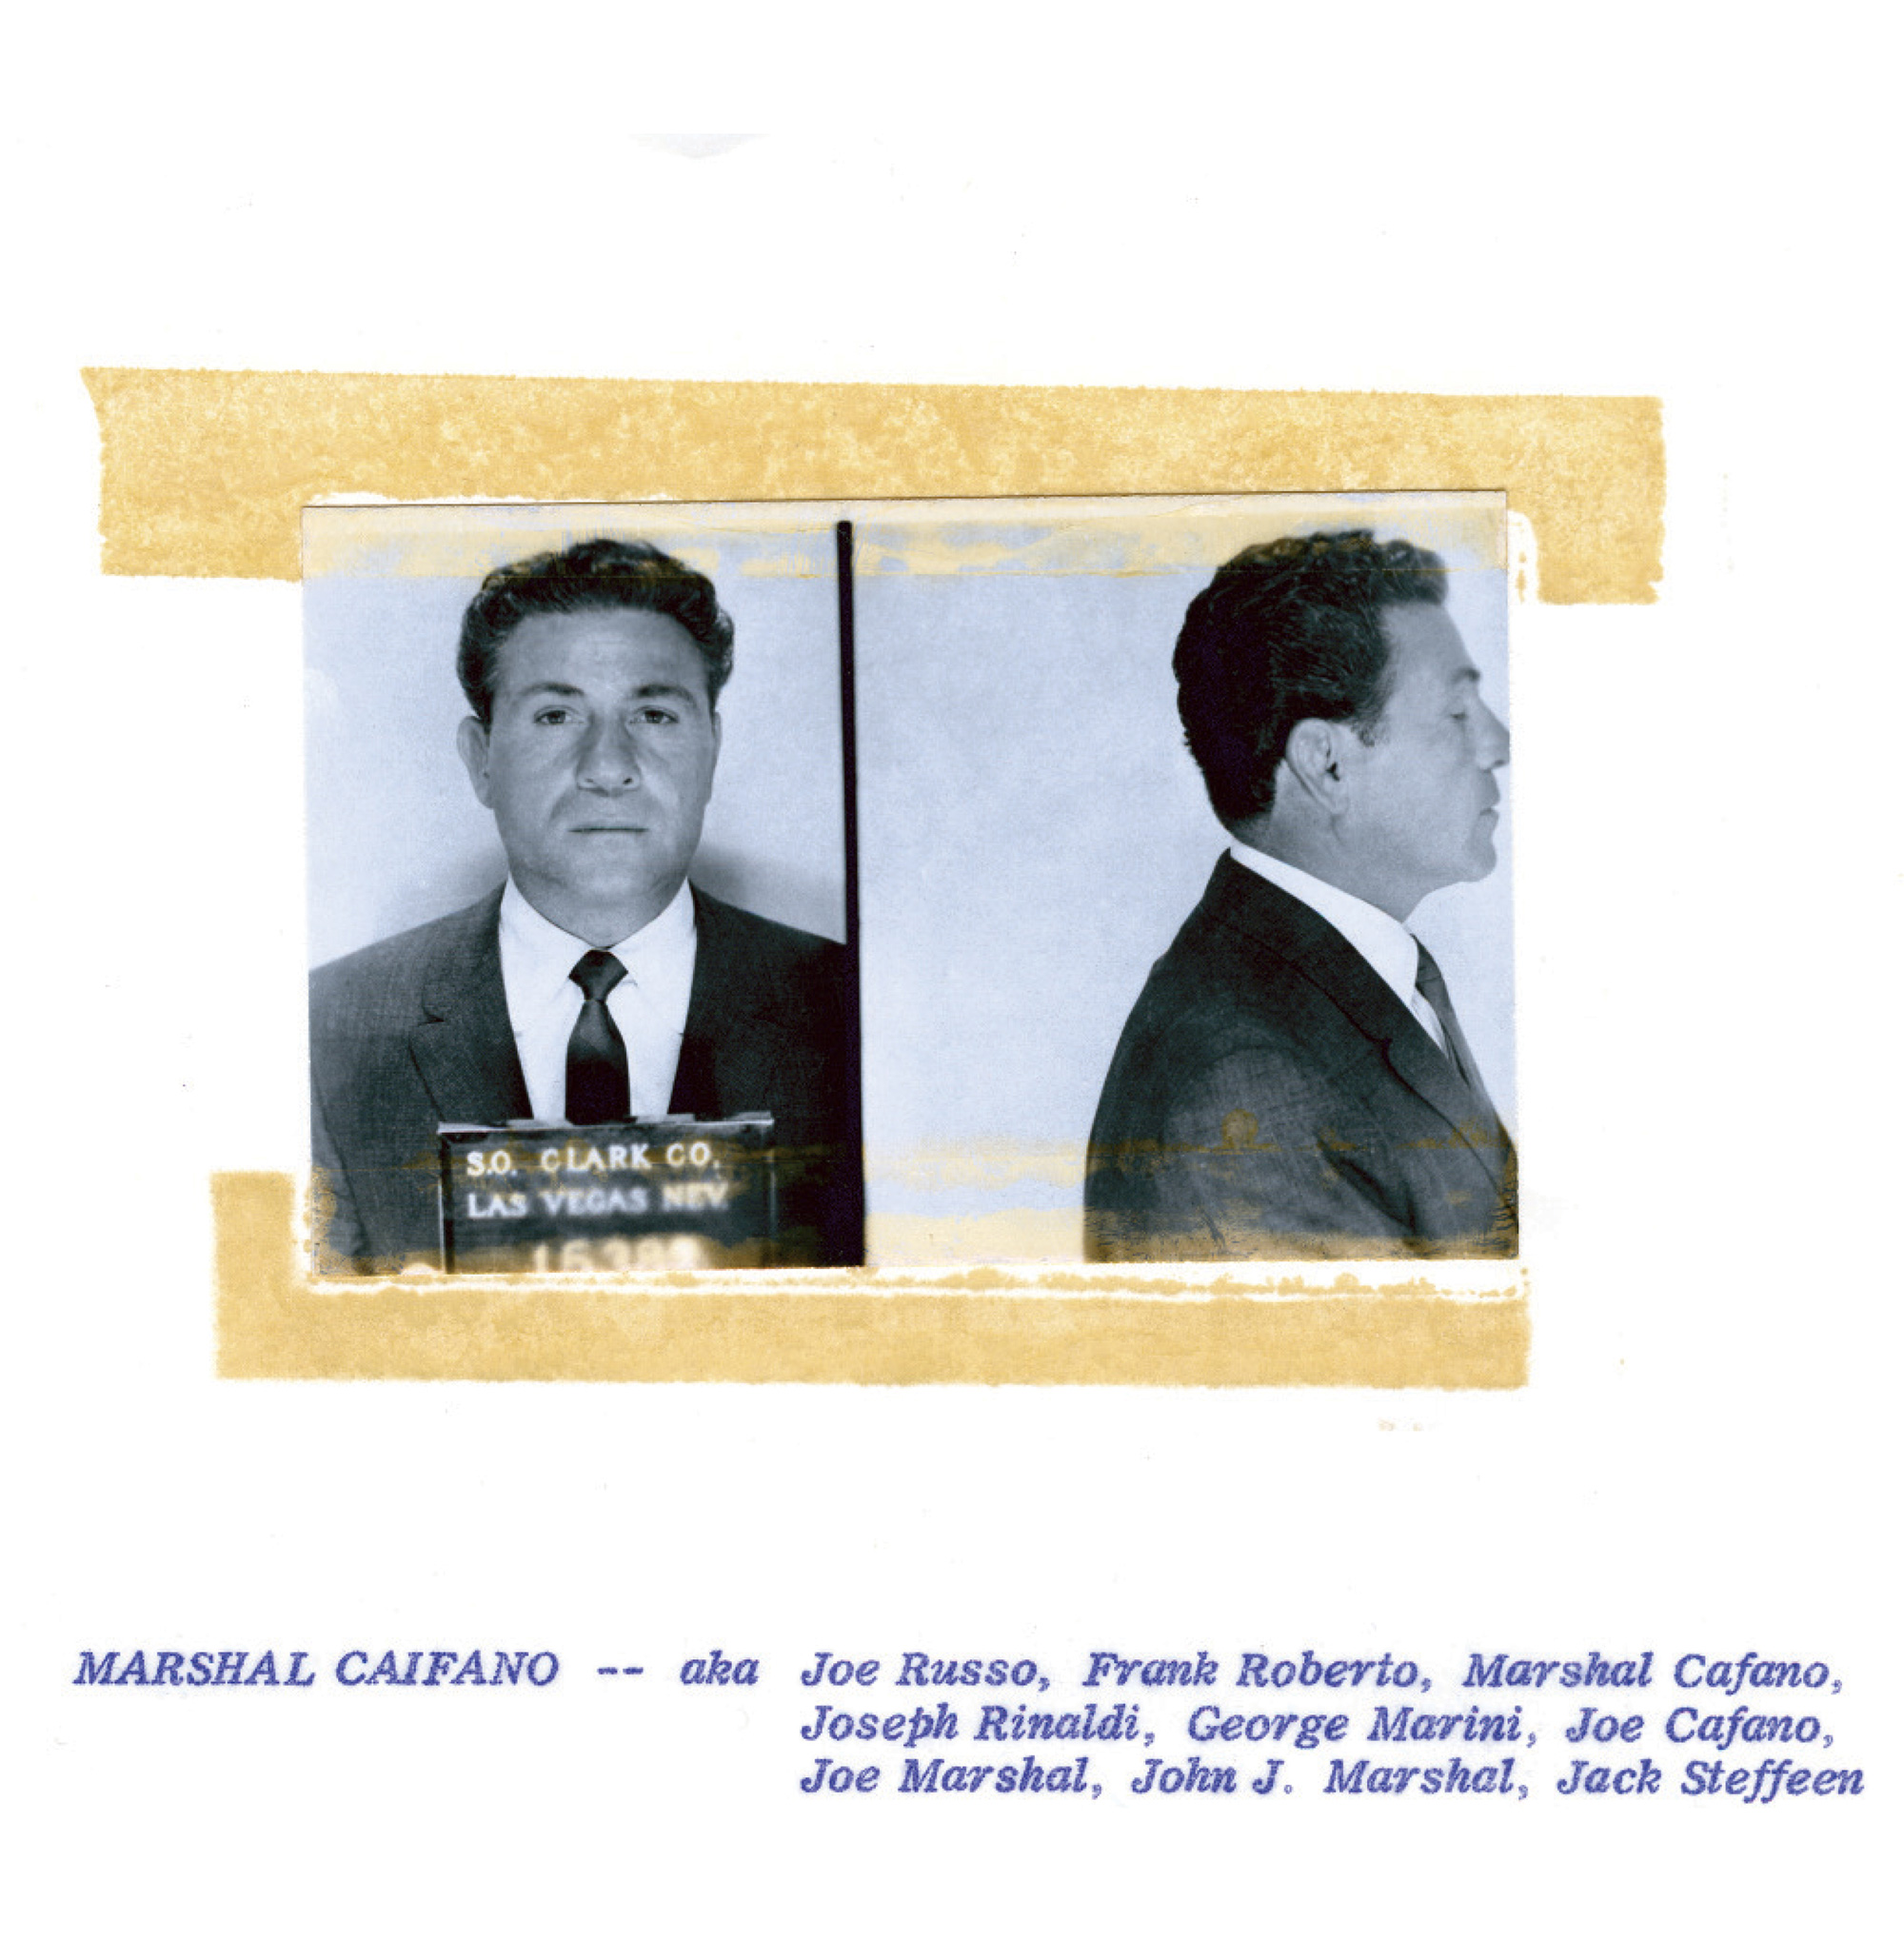 A page from the 1960 Nevada State Gaming Control Board’s Black Book, showing a mug shot of an excluded person.